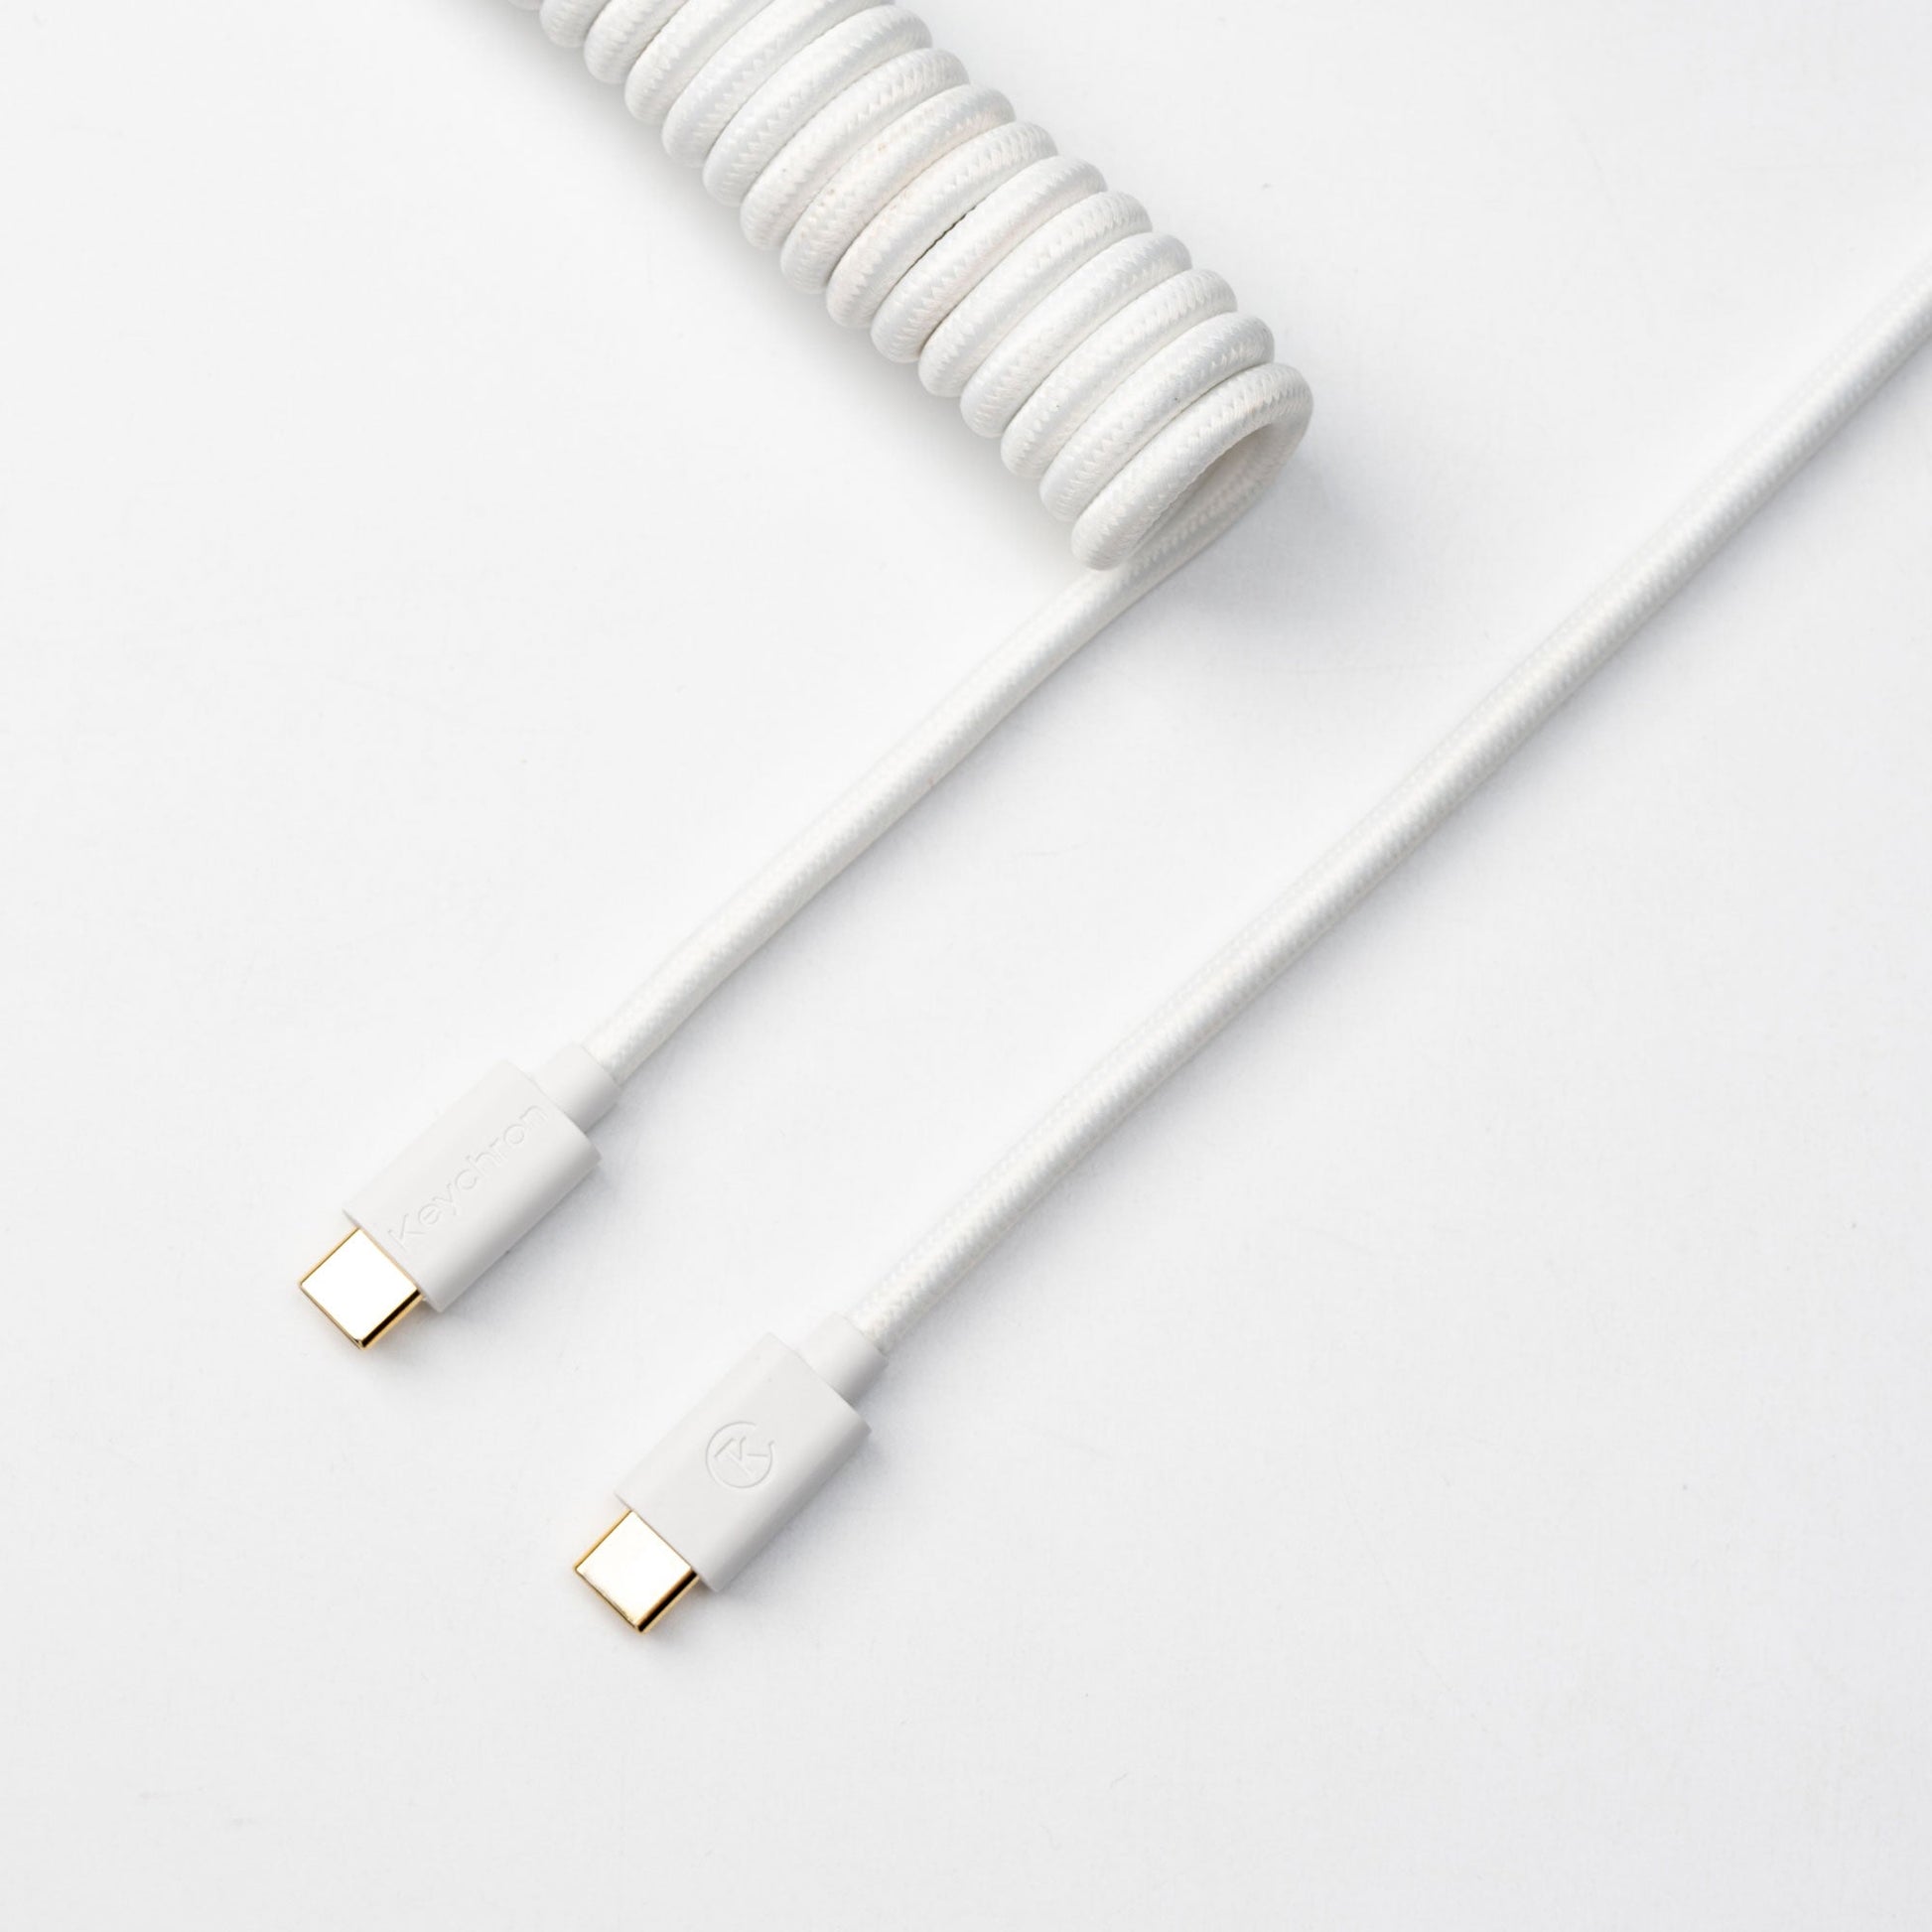 Keychron custom coiled aviator USB type-C cable white color